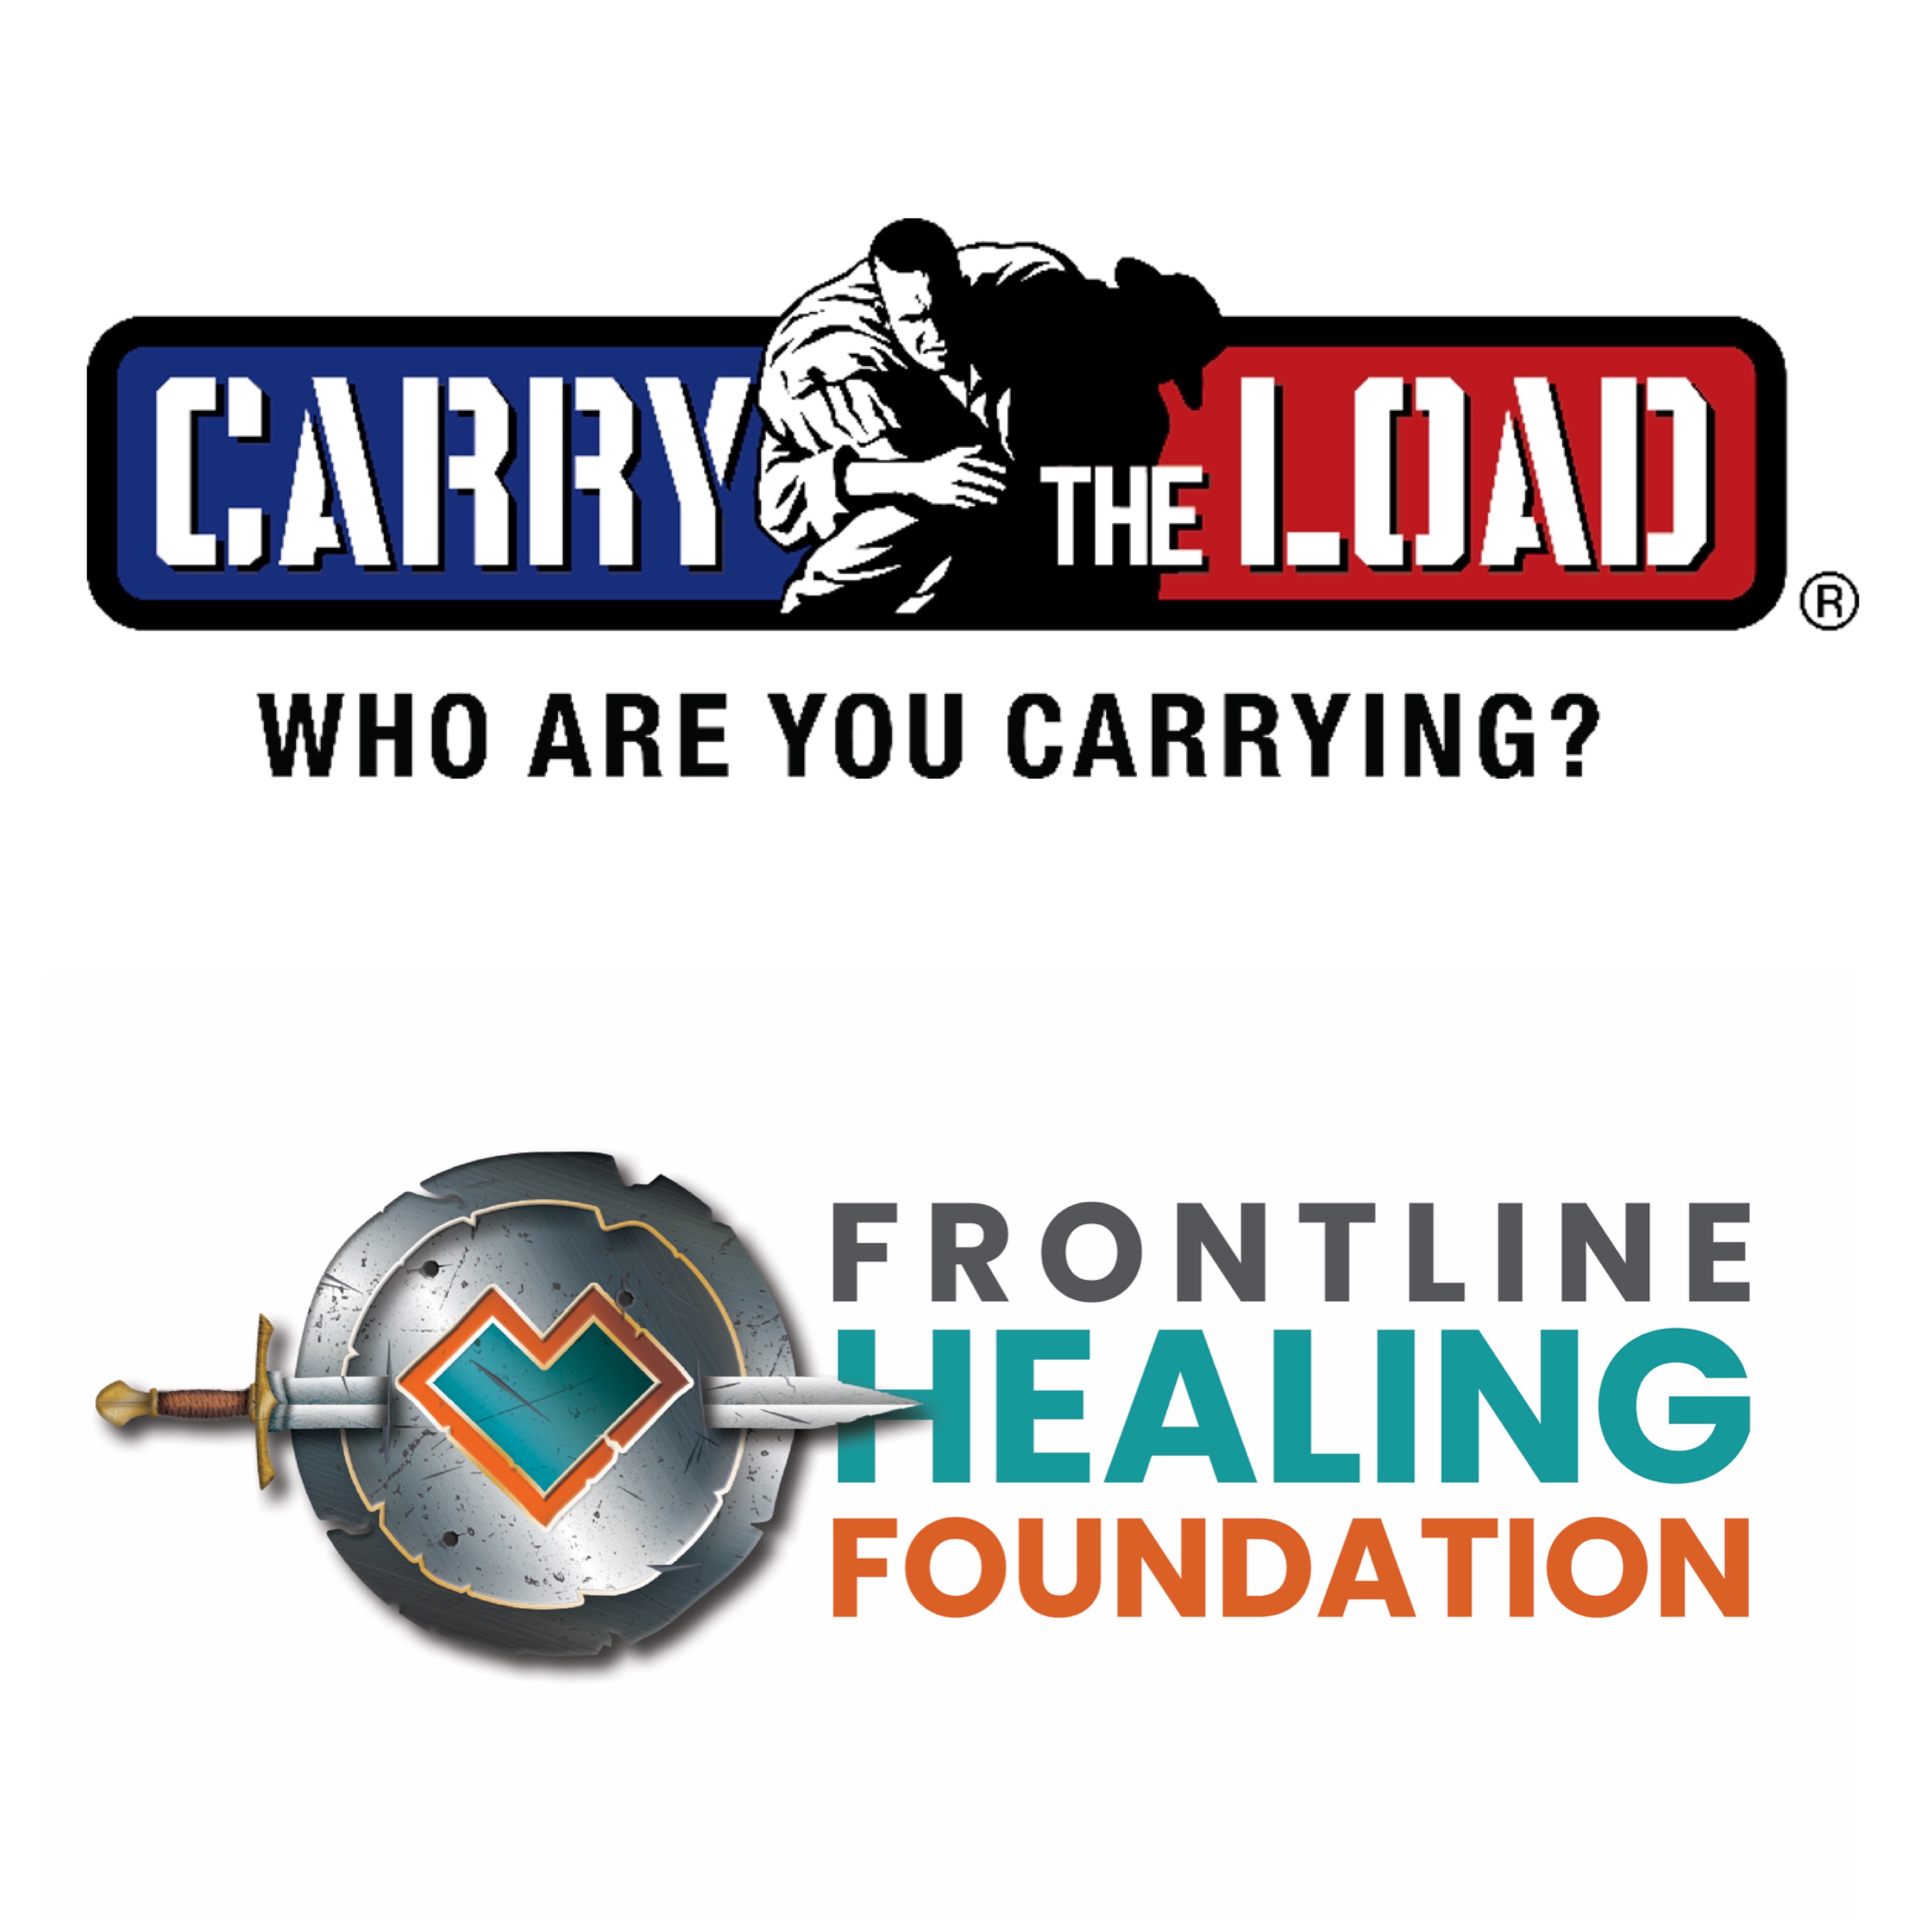 Frontline Healing Foundation is honored to be a Carry The Load non-profit partner for their 2023 Memorial May events to restore the true meaning of Memorial Day – for the sixth year in a row.